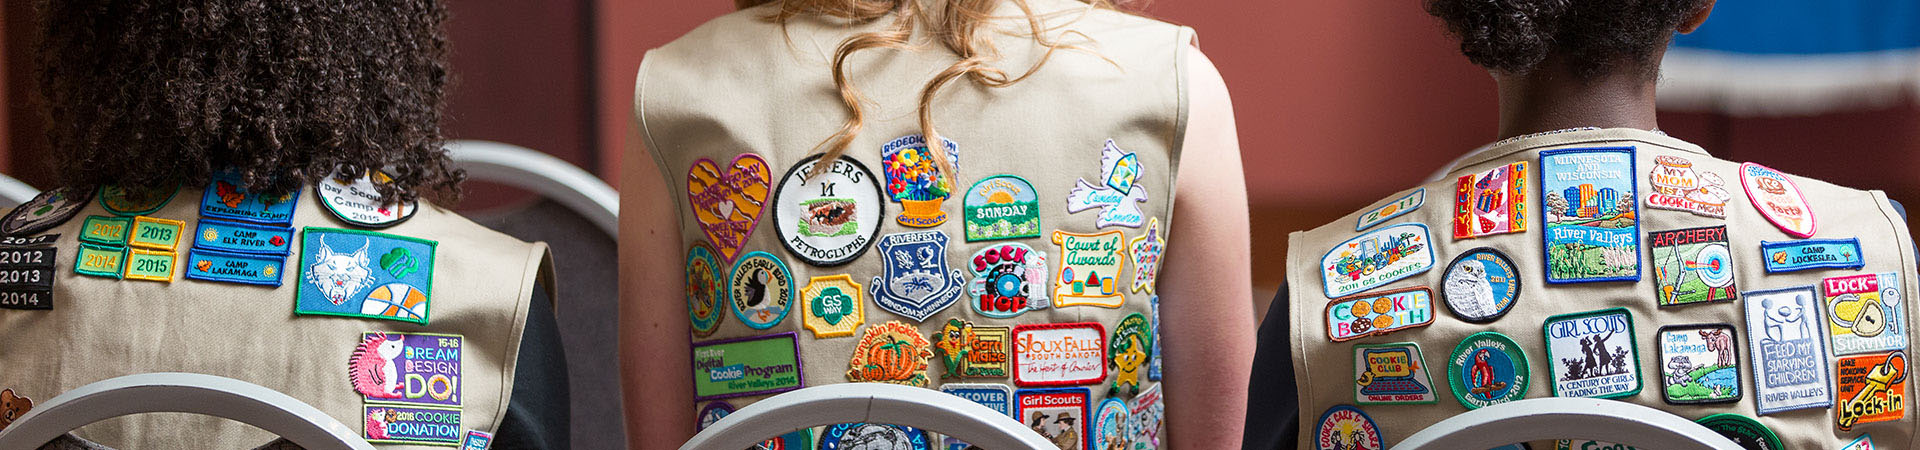  Girls in Vest uniforms filled badges and patches 